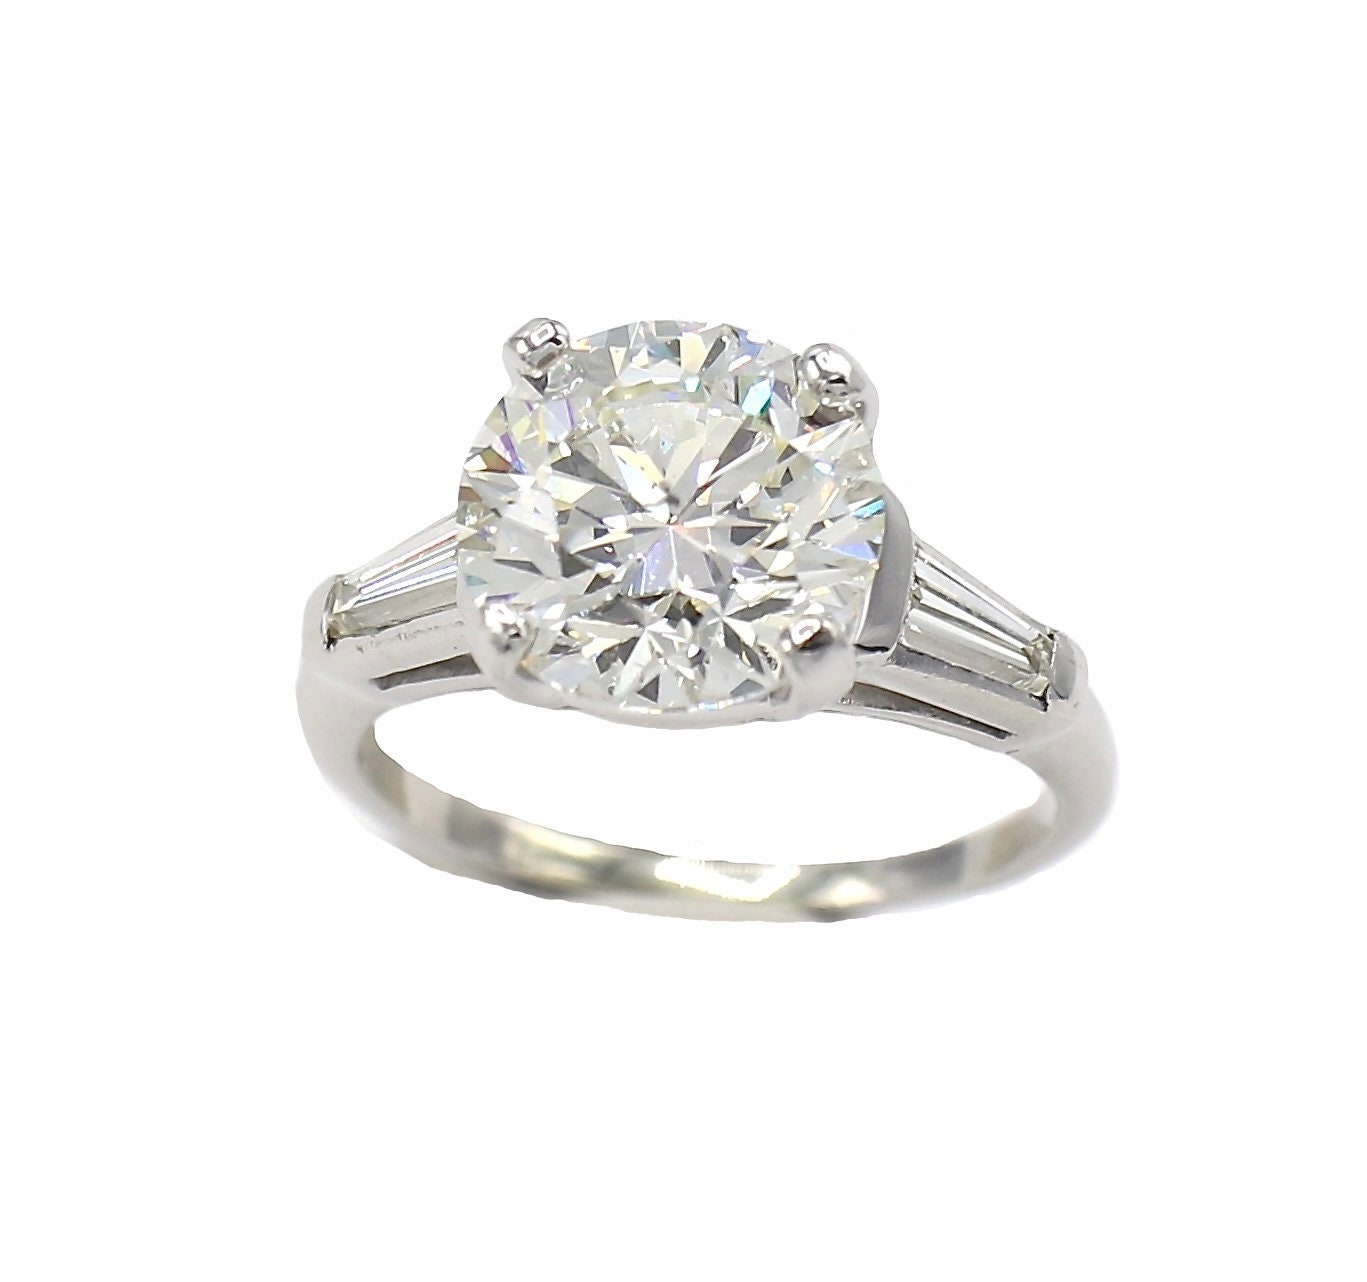 Jessa 1.08ct Oval Lab-Grown Diamond Solitaire Engagement Ring